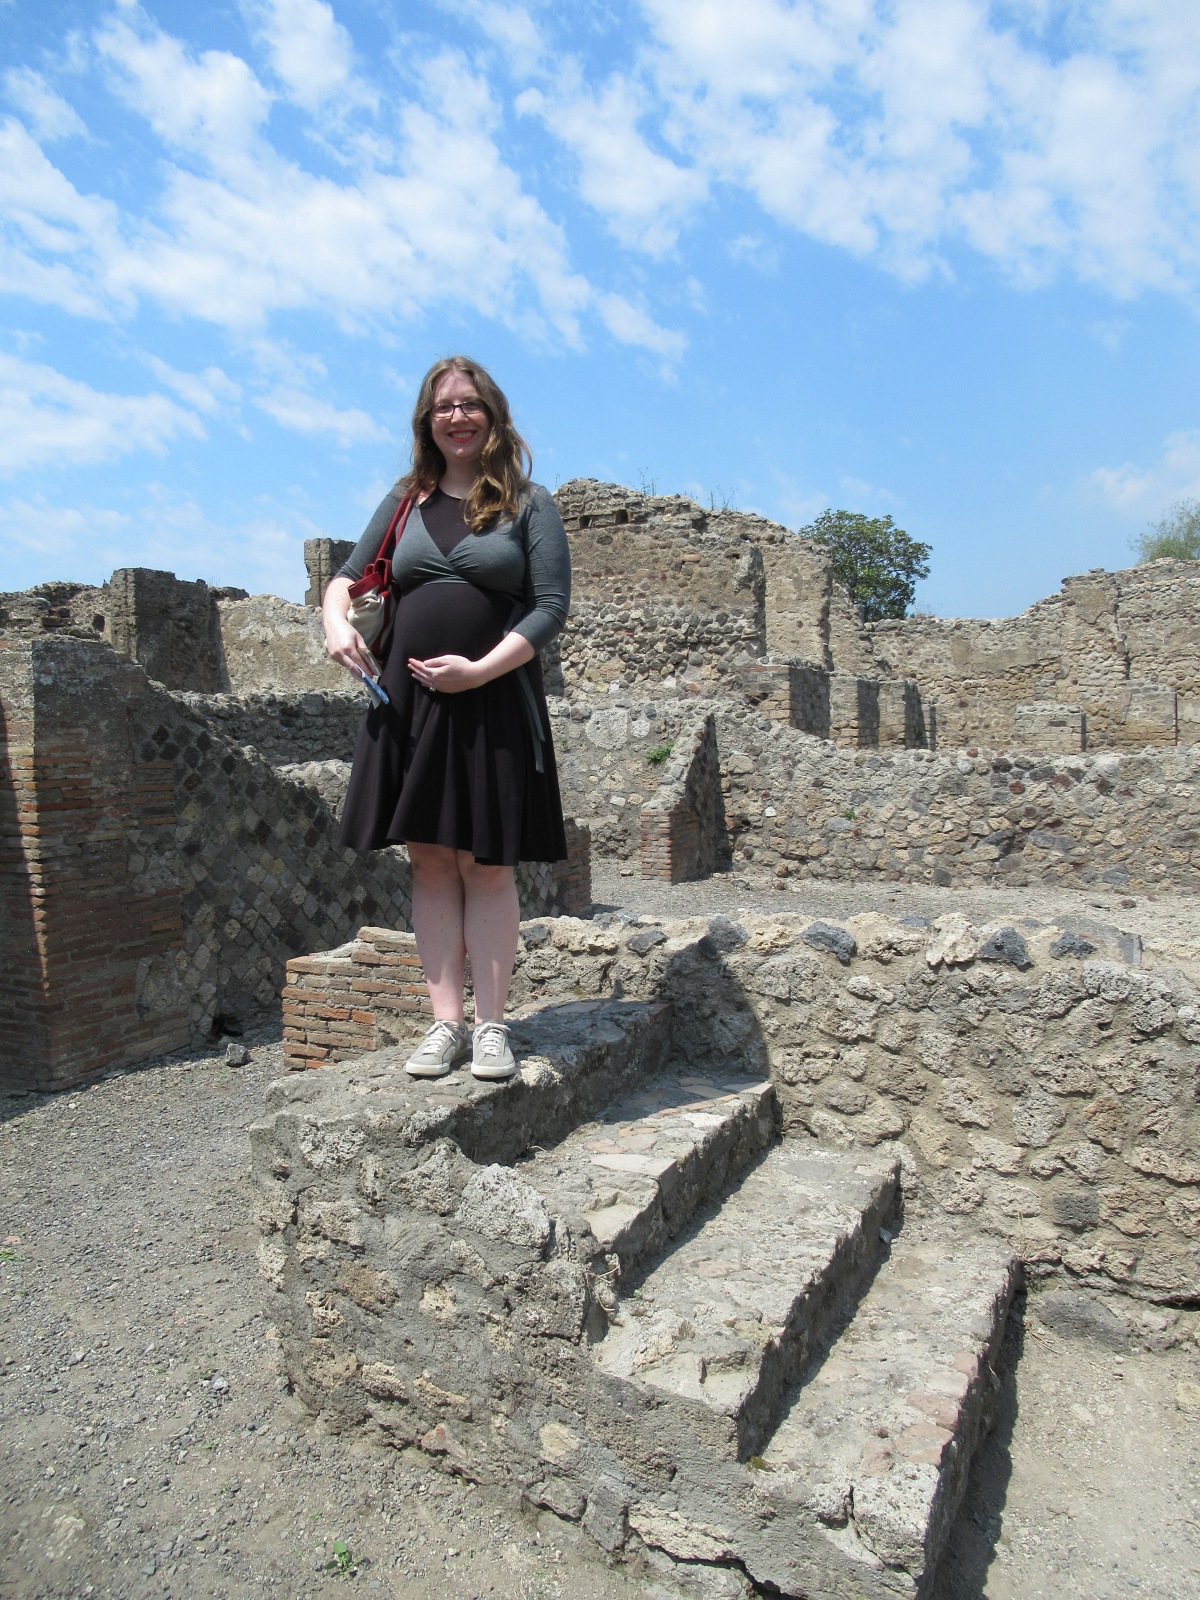 Pompeii & Herculaneum: Travel Guide for a Babymoon